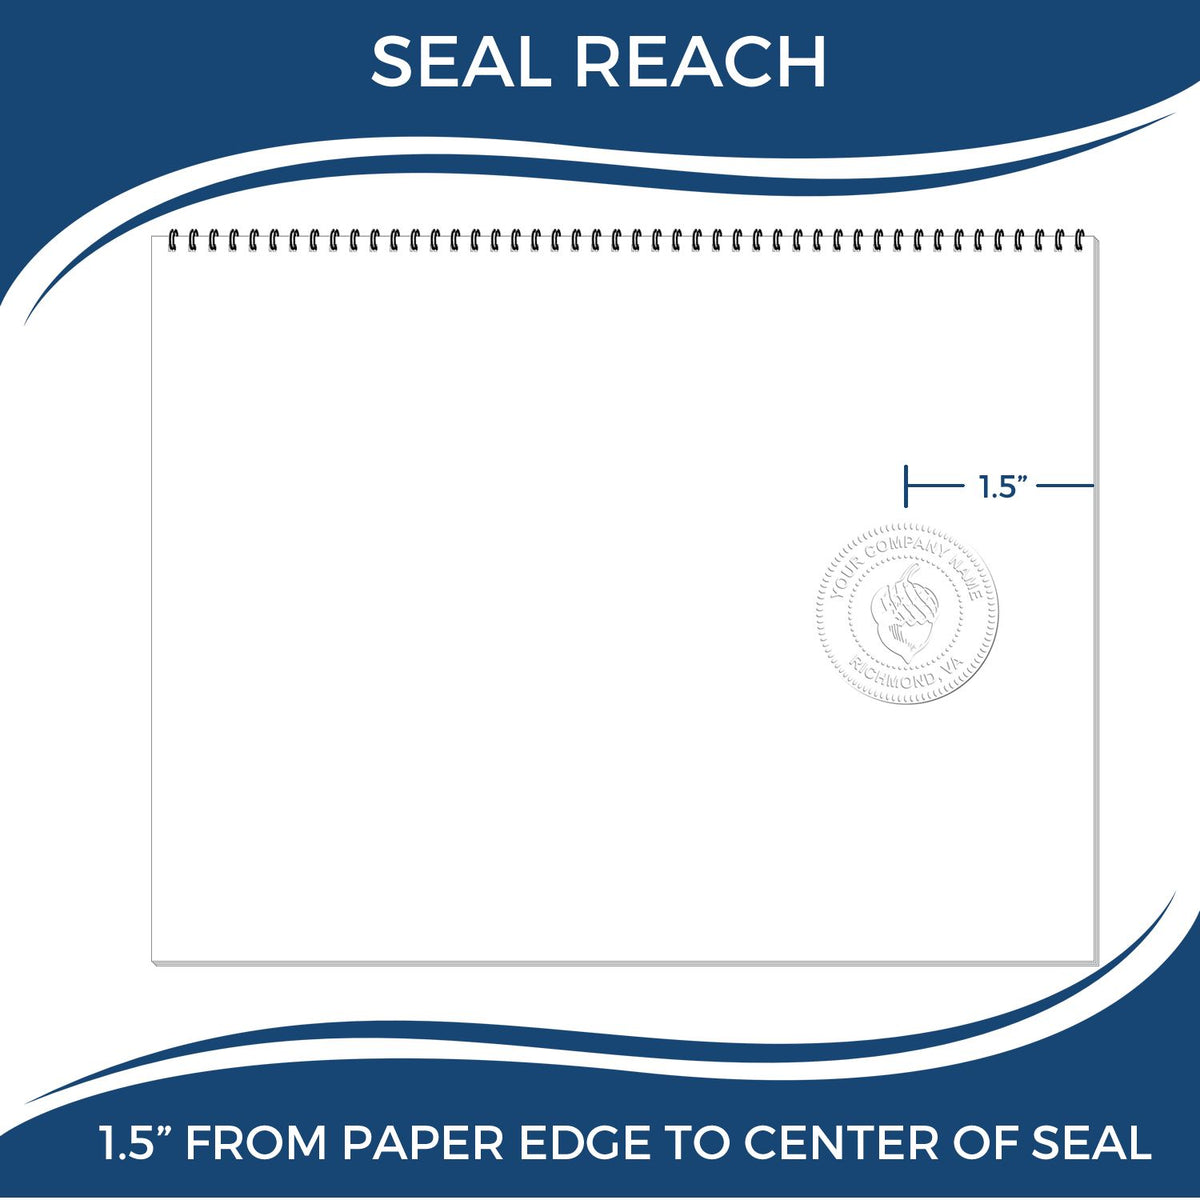 An infographic showing the seal reach which is represented by a ruler and a miniature seal image of the Utah Desk Architect Embossing Seal